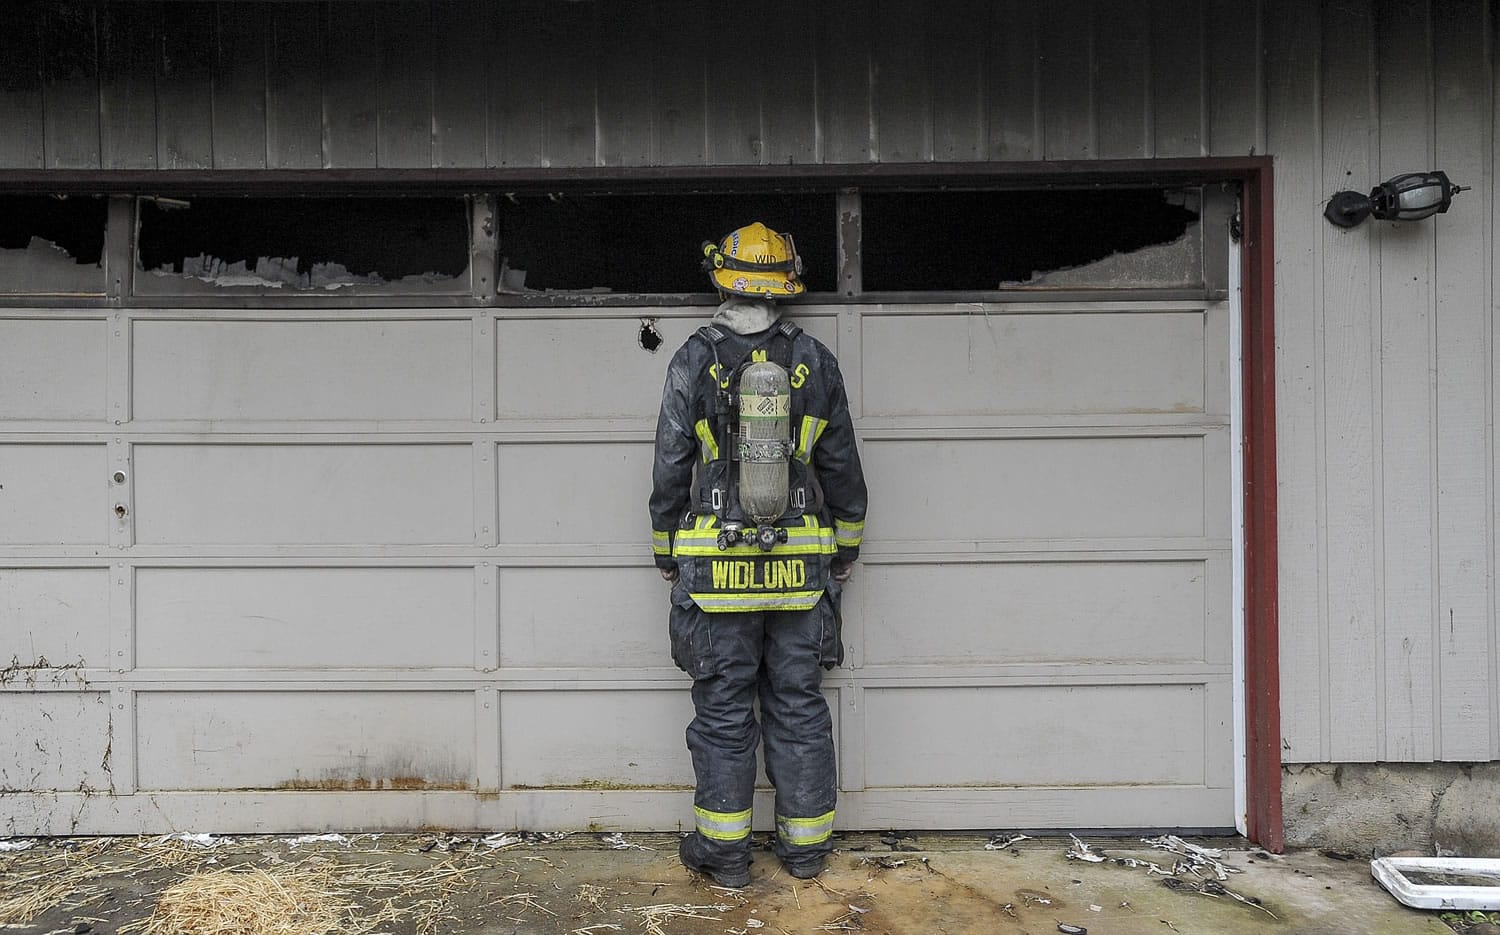 Firefighter Mark Widlund looks into a garage during a training burn at a house in Camas.